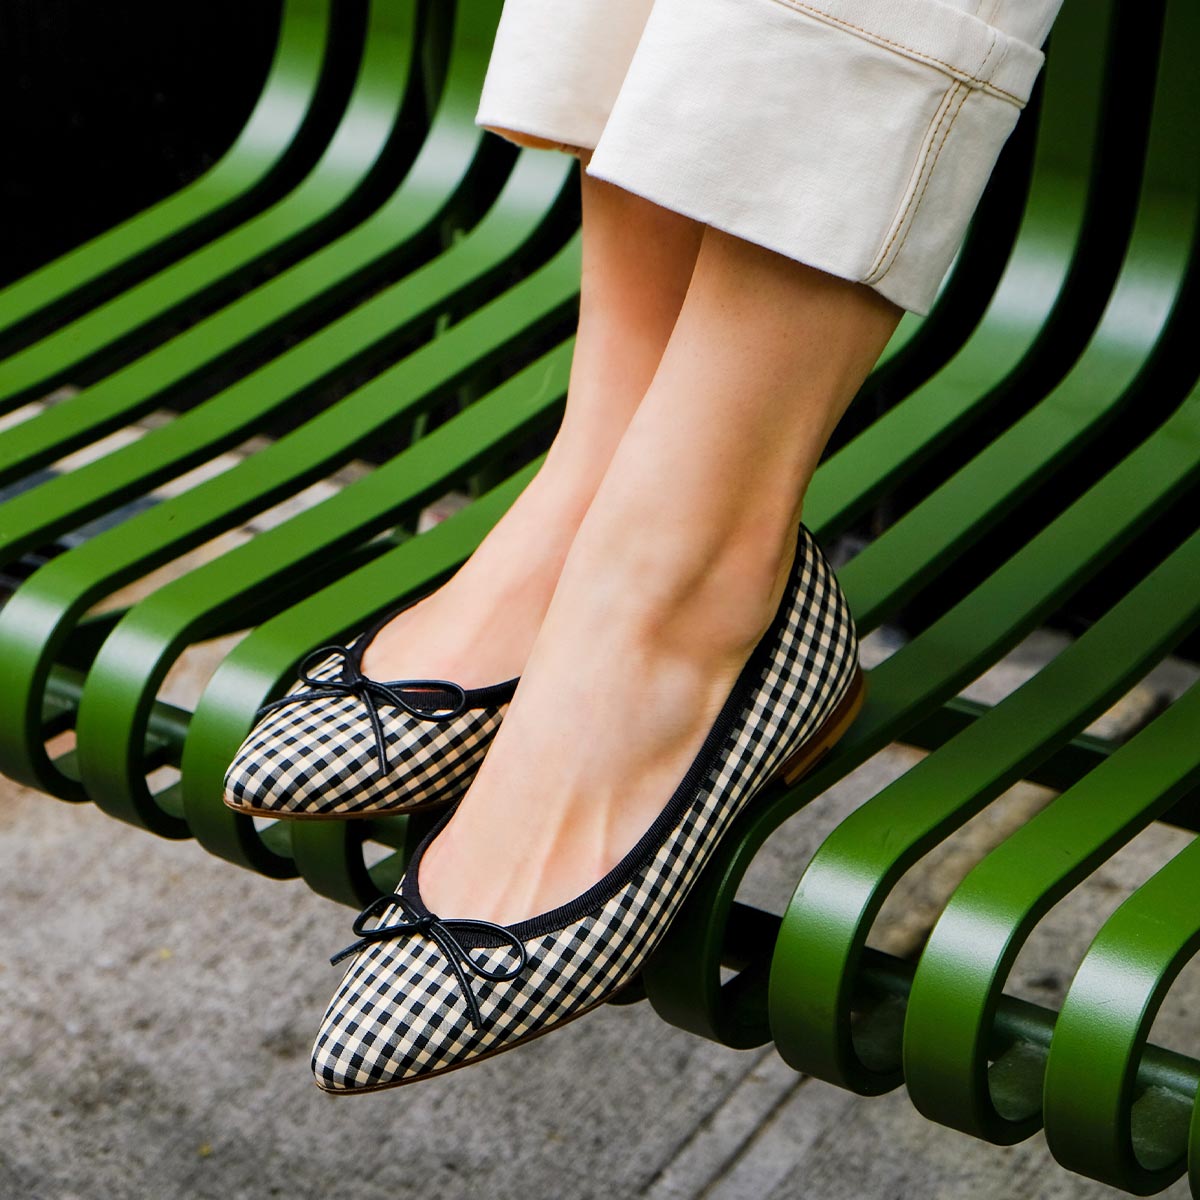 The Pointe - Tan and Black Gingham